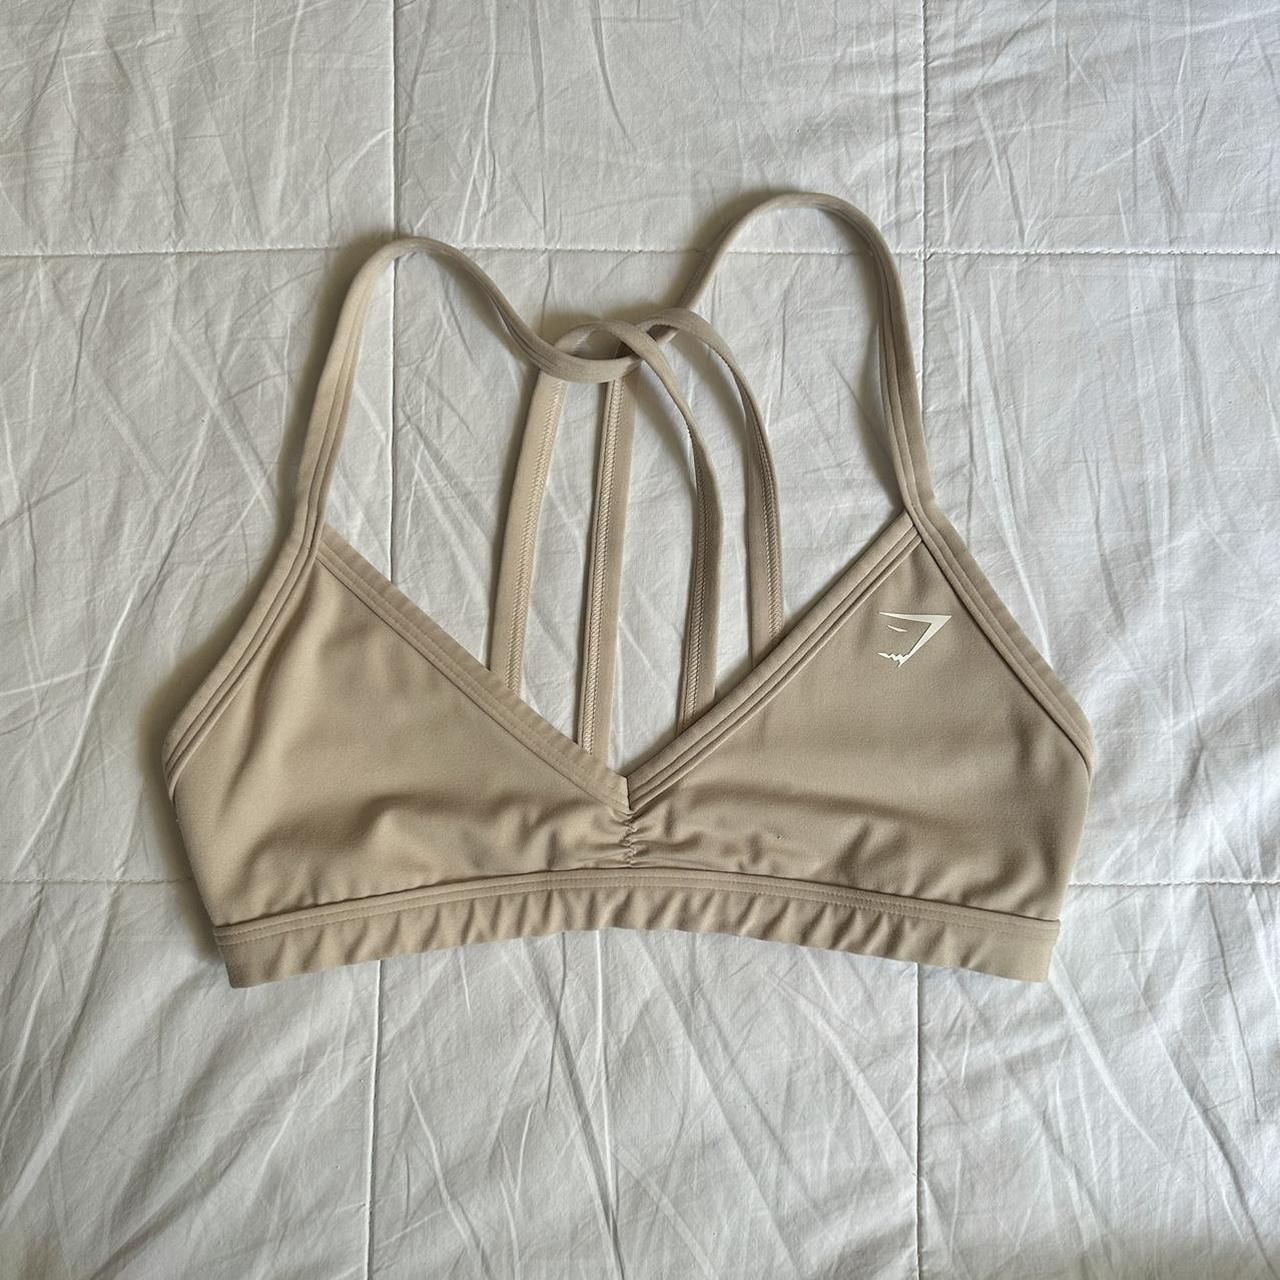 Workout sports bra from primary, worn twice, perfect - Depop